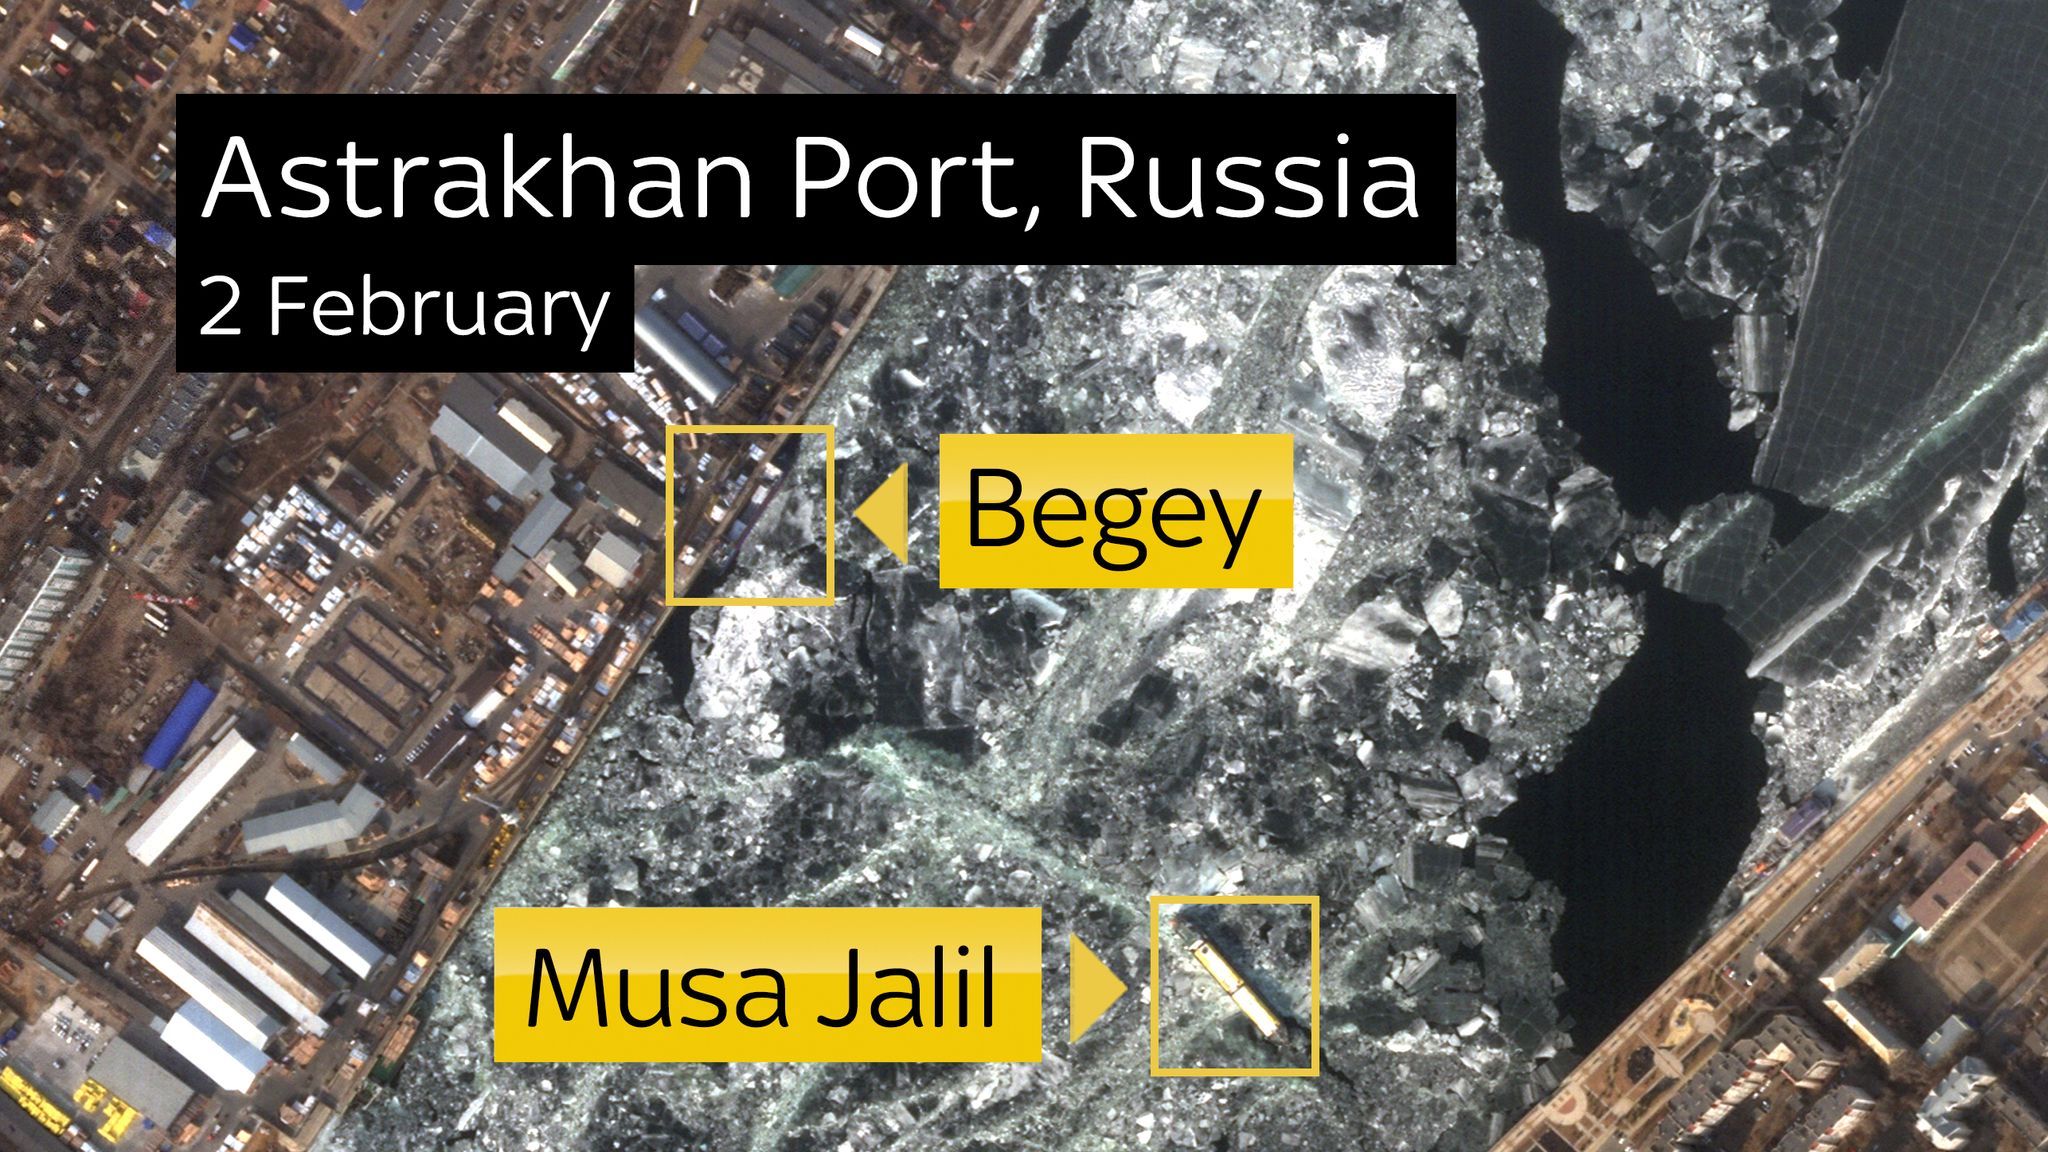 Both Russian ships can be seen in Astrakhan Port in Russia in this satellite image from 2 February. They go on to leave the port in the next 24 hours ~